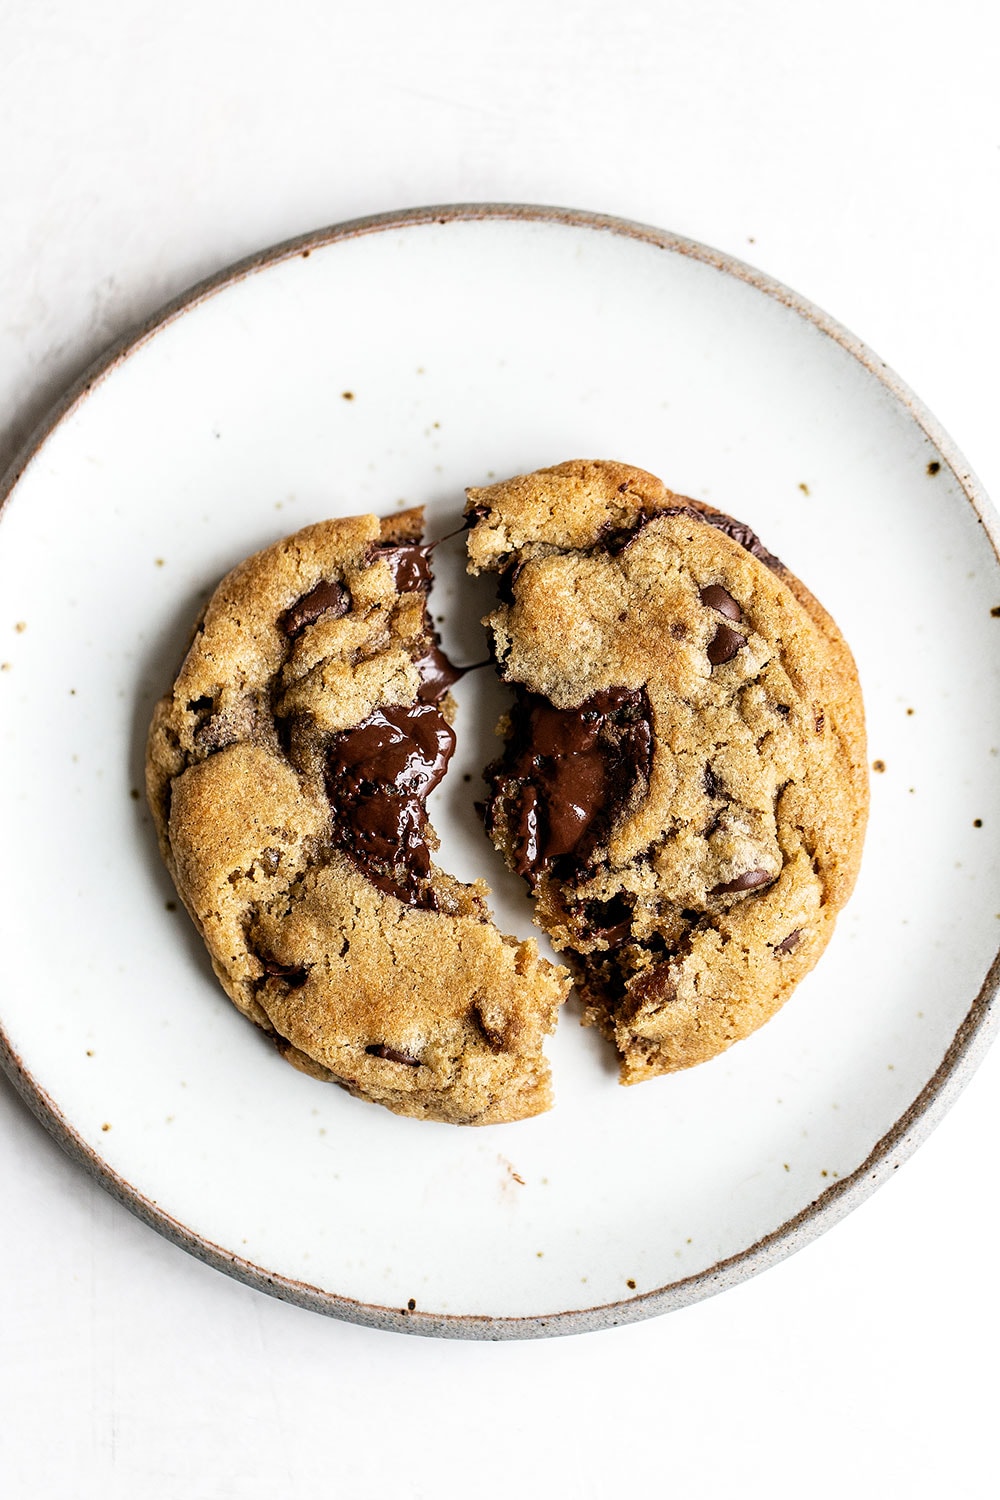 Chocolate chip cookie on a plate